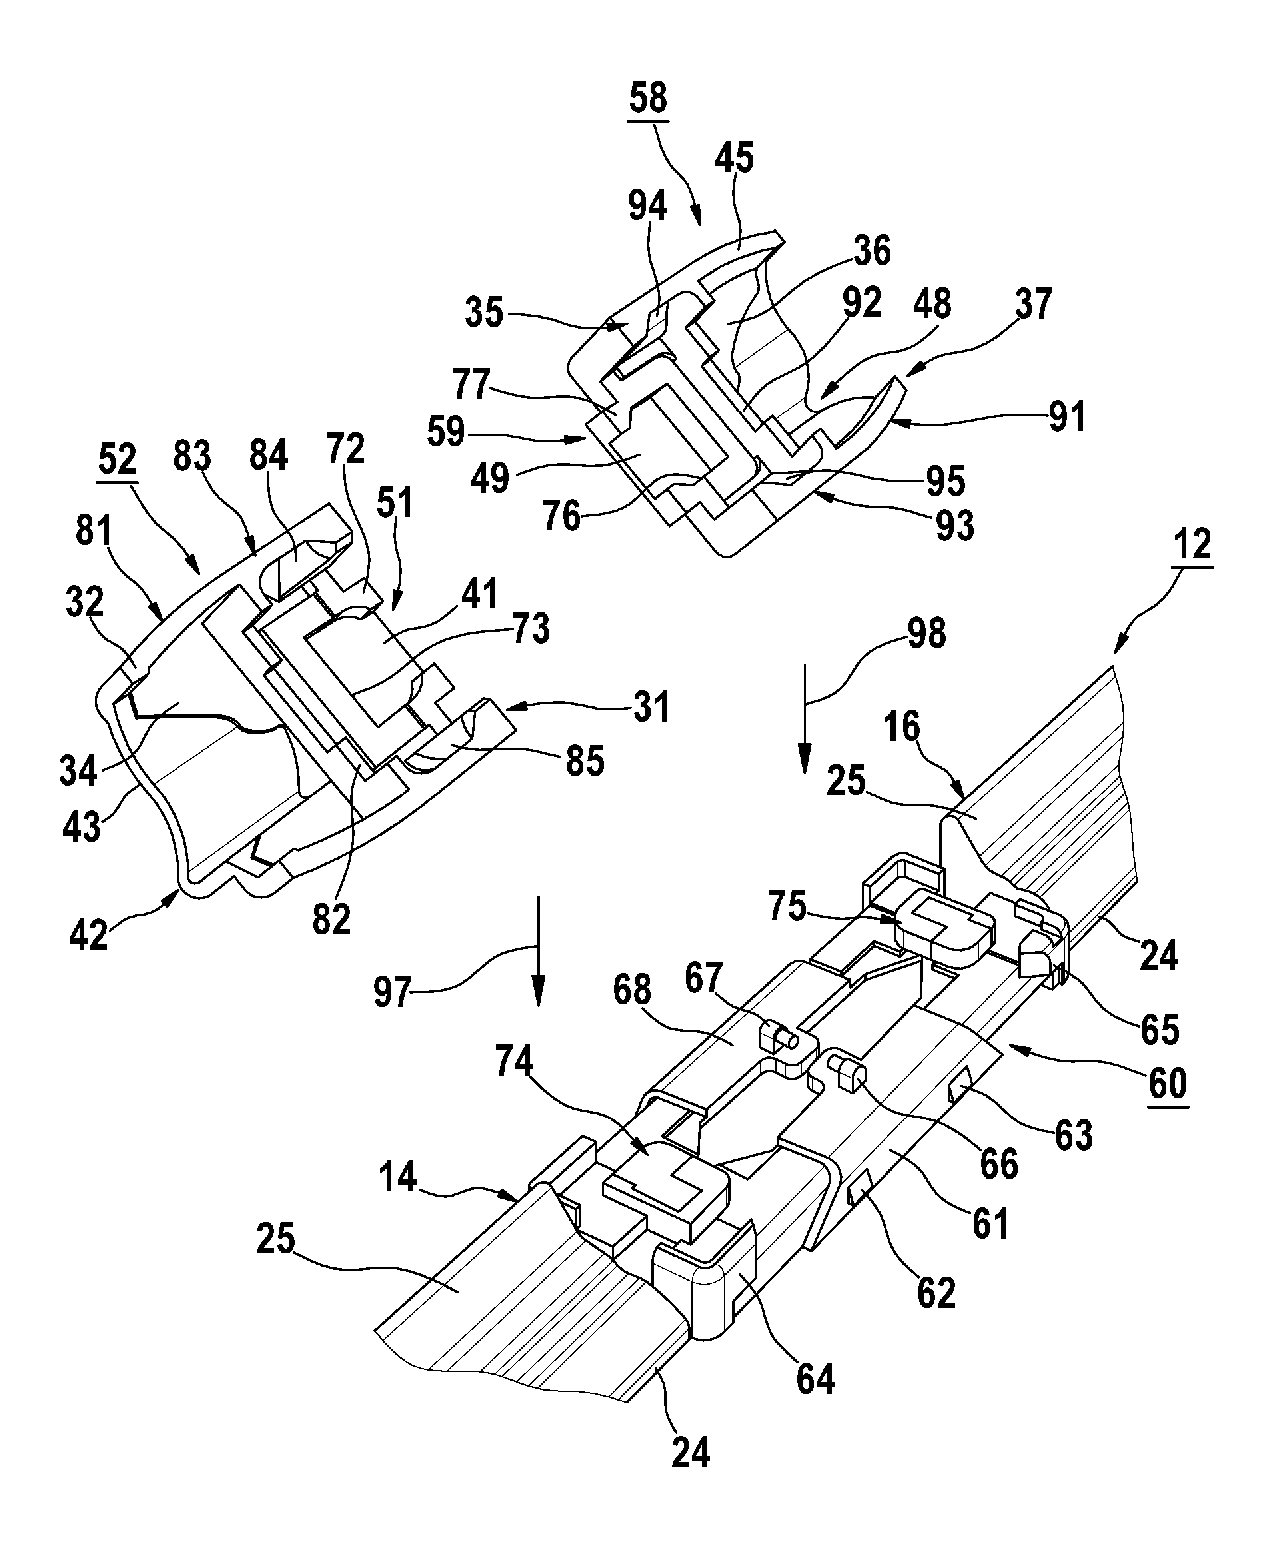 Wiper blade having an adapter unit for attaching to a wiper arm